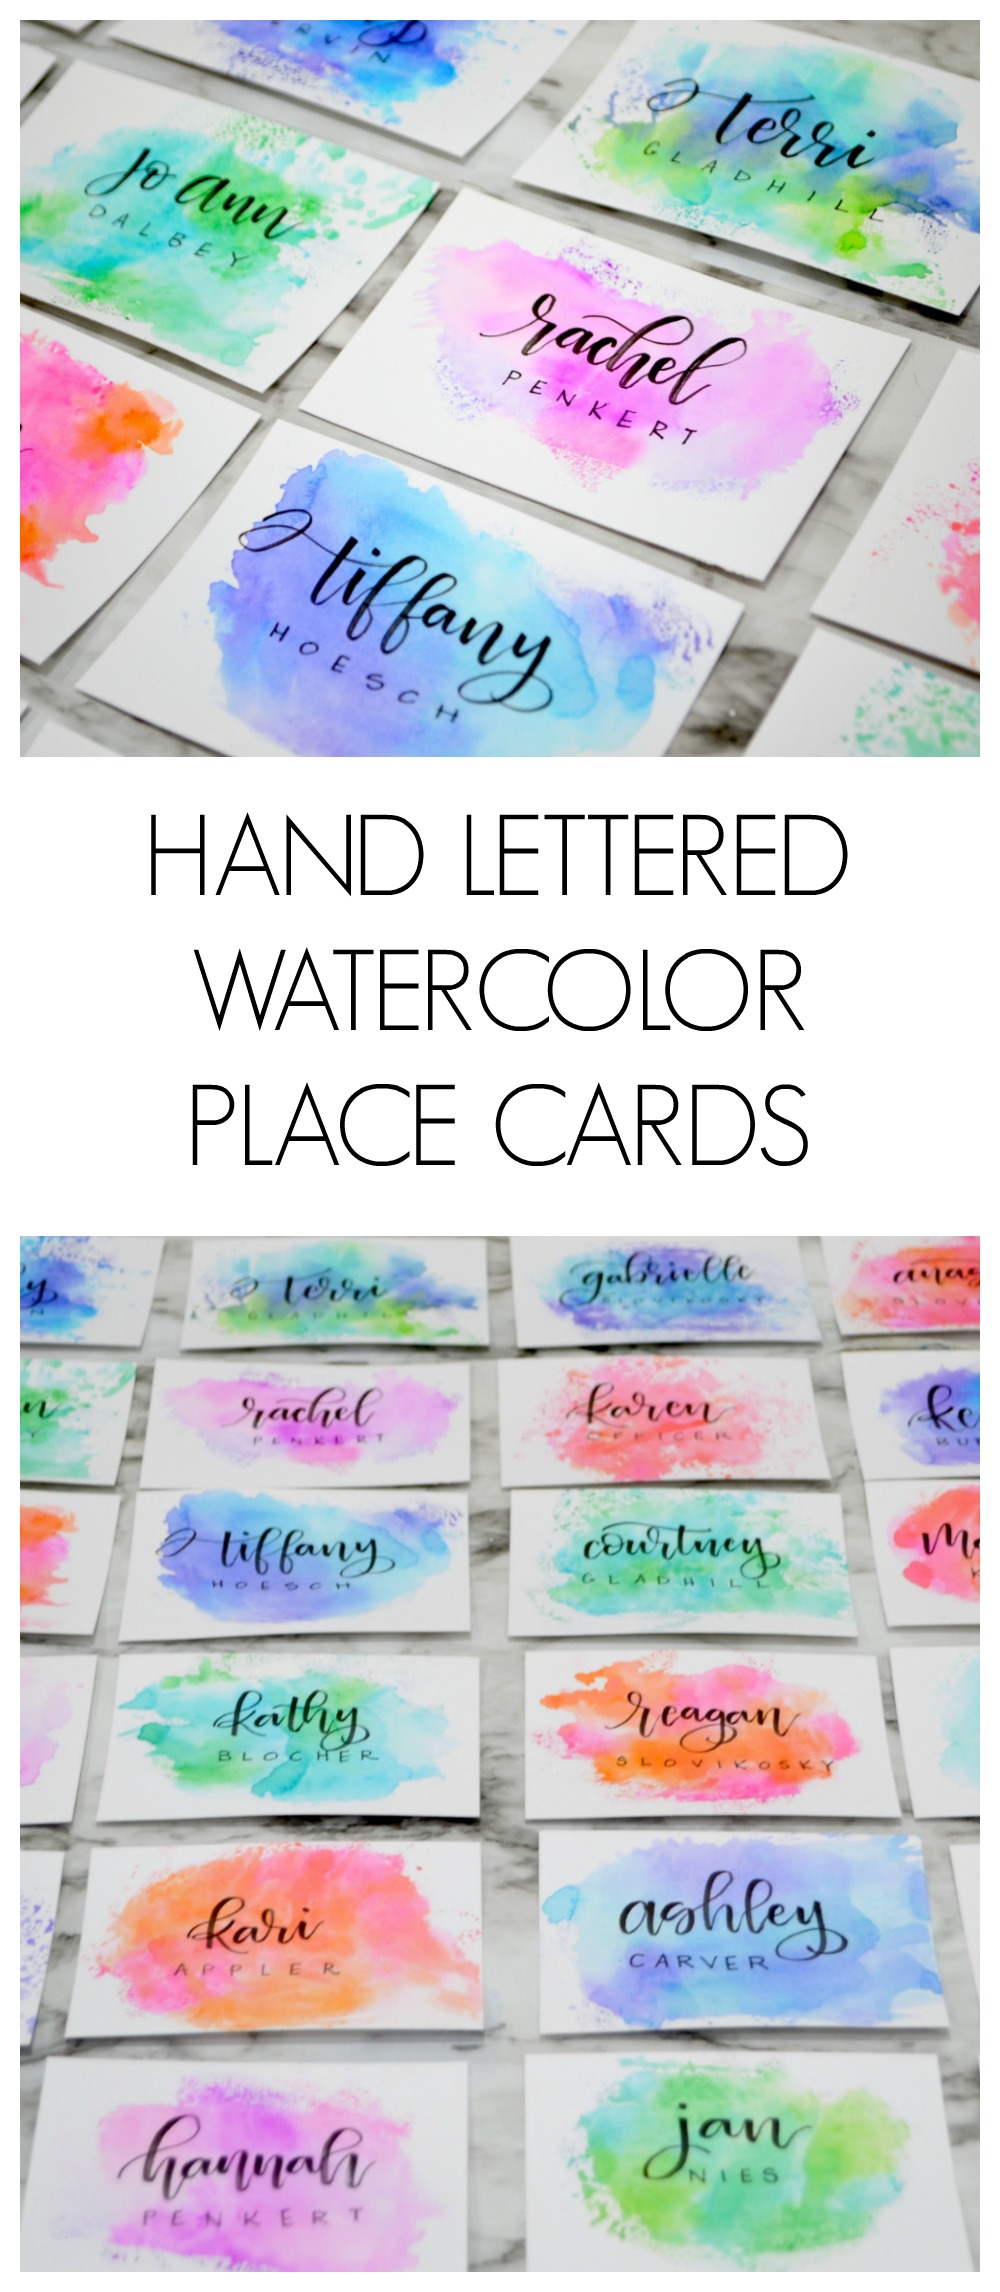 Hand Lettered Watercolor Place Cards